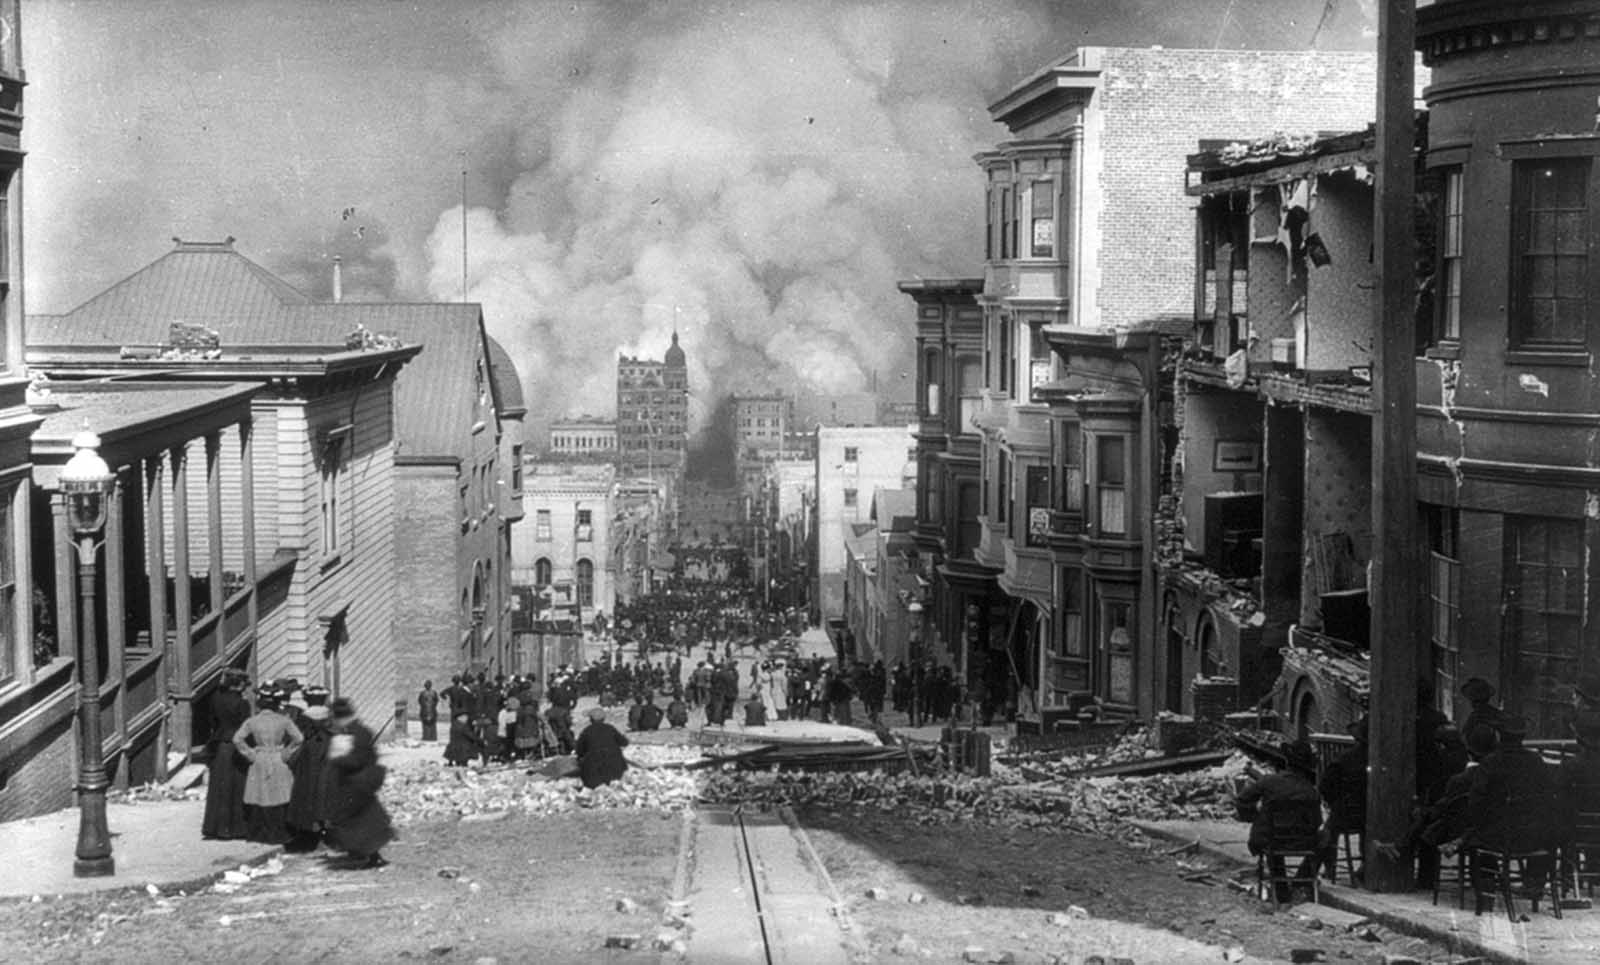 San Francisco residents, some seated in chairs, sit among the earthquake damage, watching out-of-control fires in the distance